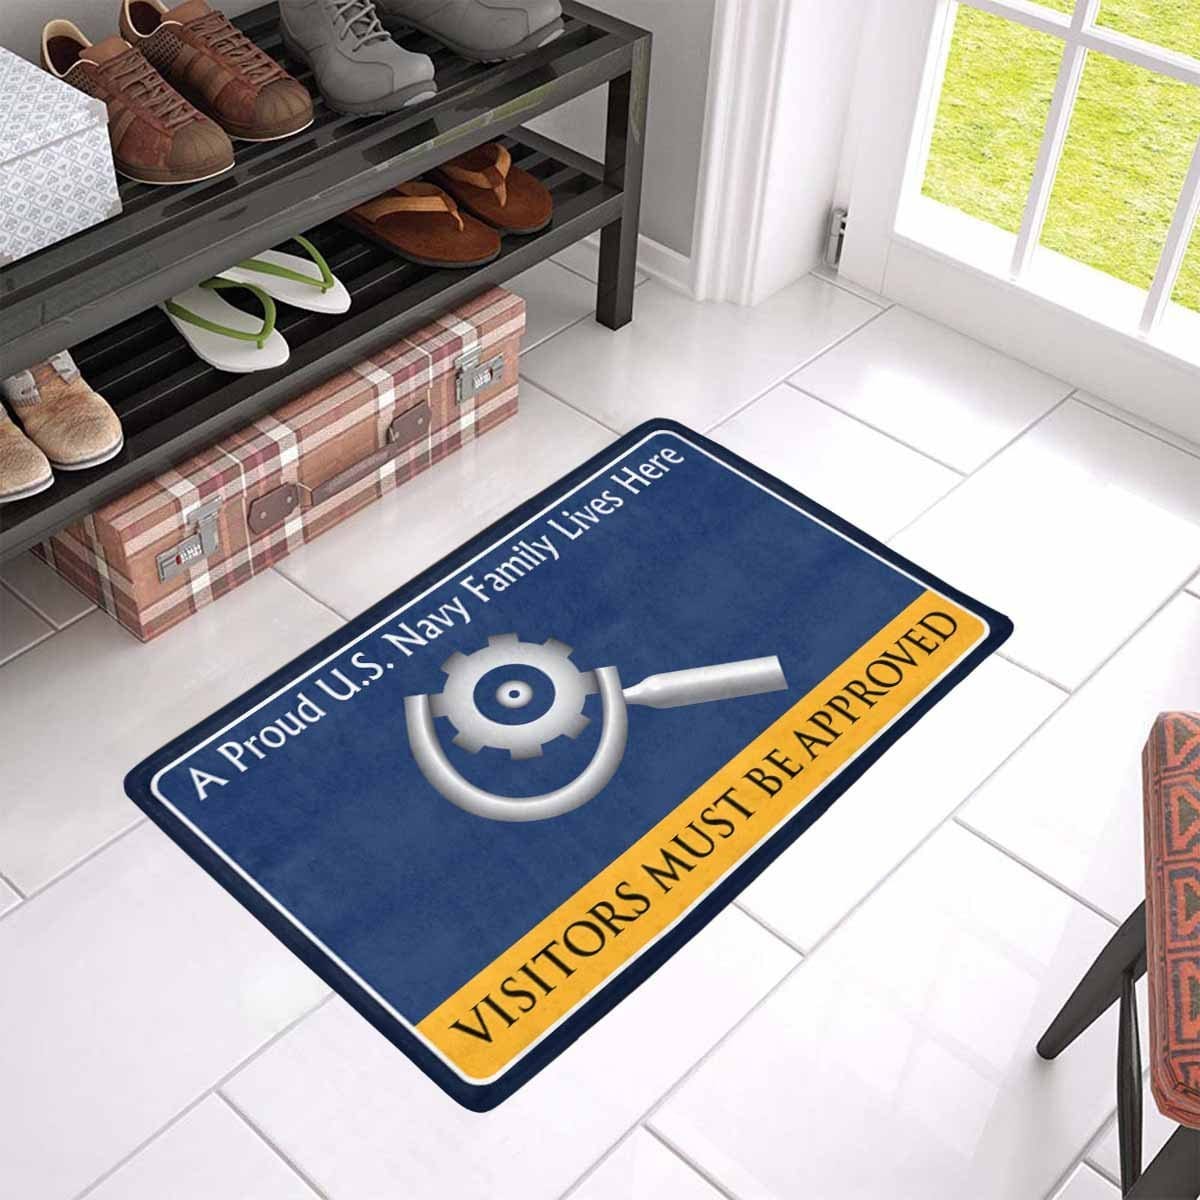 U.S Navy Machinery repairman Navy MR Family Doormat - Visitors must be approved (23,6 inches x 15,7 inches)-Doormat-Navy-Rate-Veterans Nation